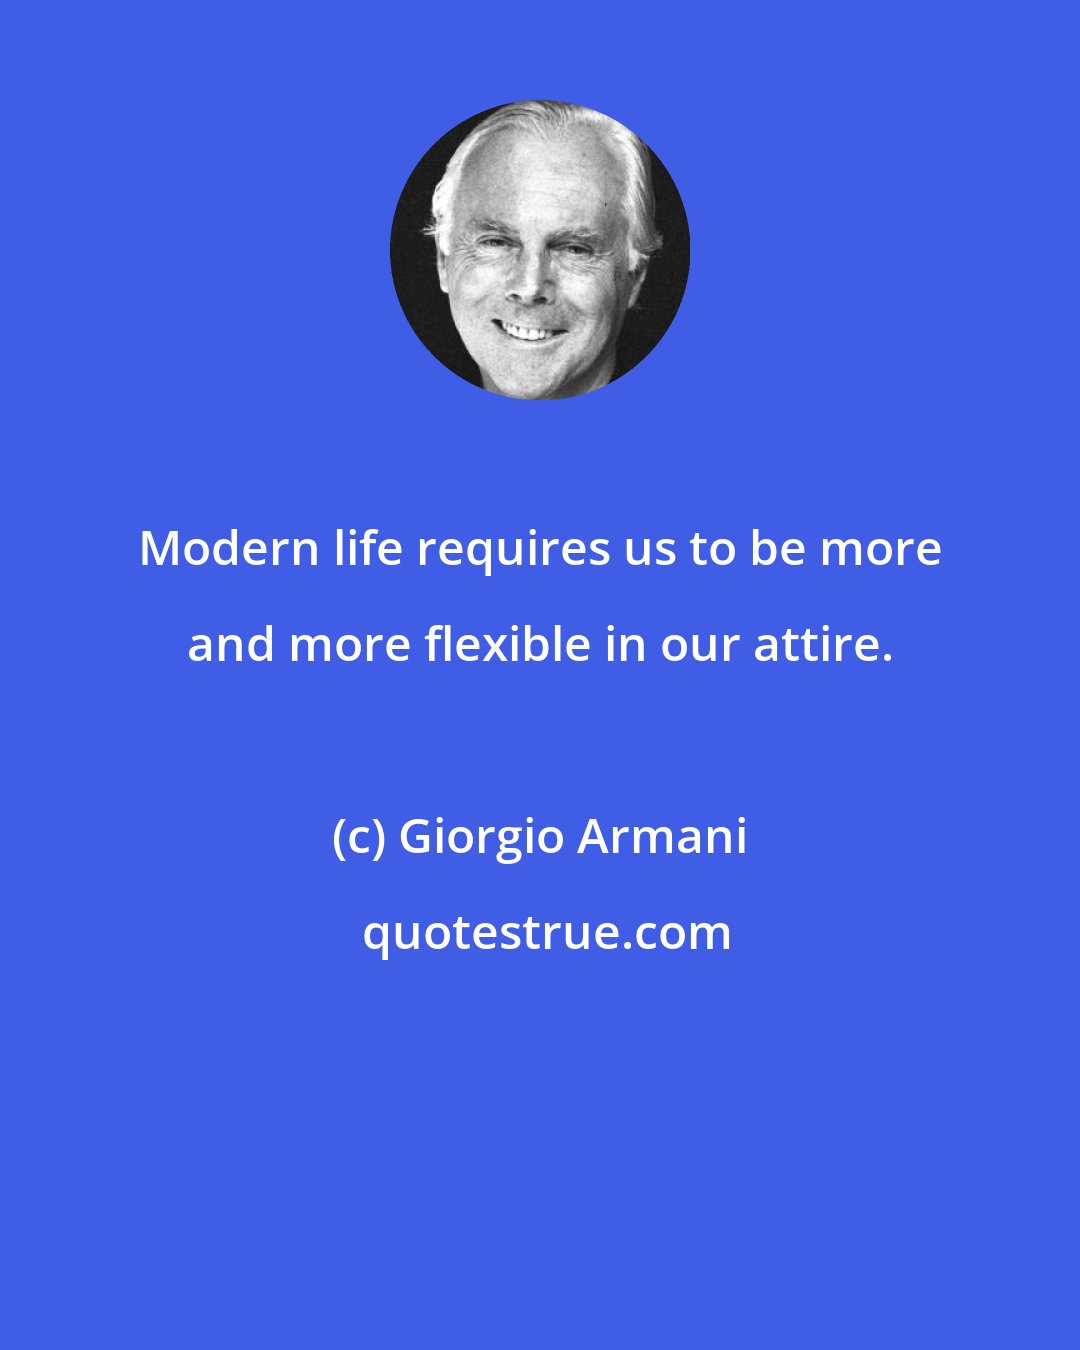 Giorgio Armani: Modern life requires us to be more and more flexible in our attire.